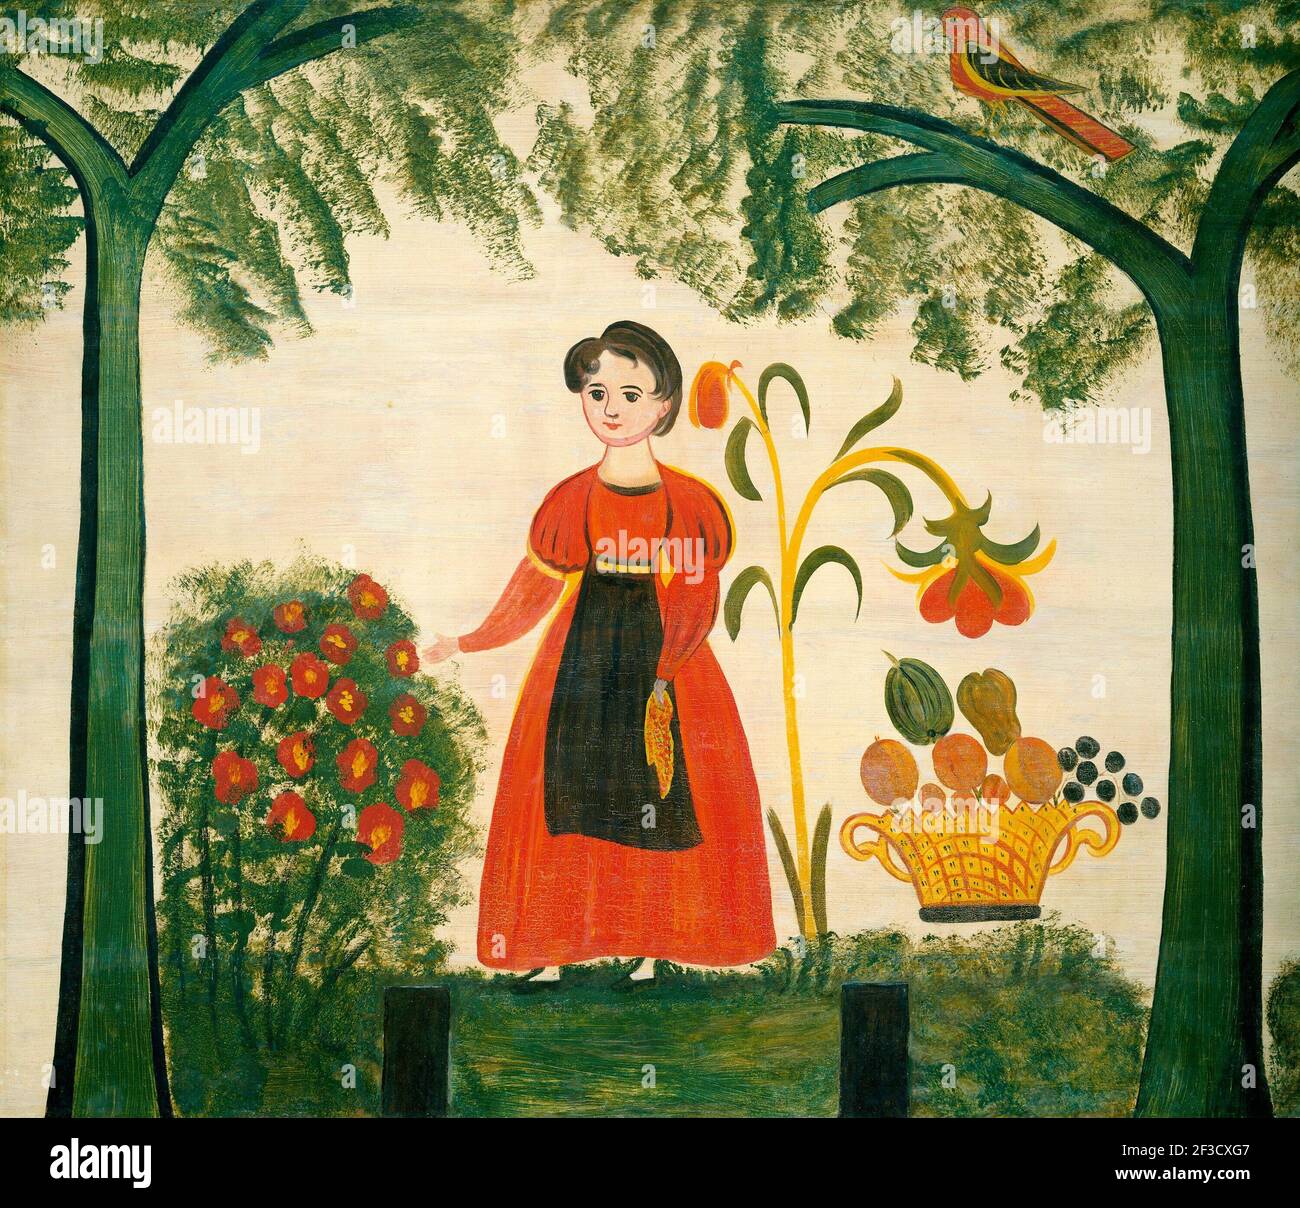 Girl in Red with Flowers and a Distelfink, c. 1830. Stock Photo